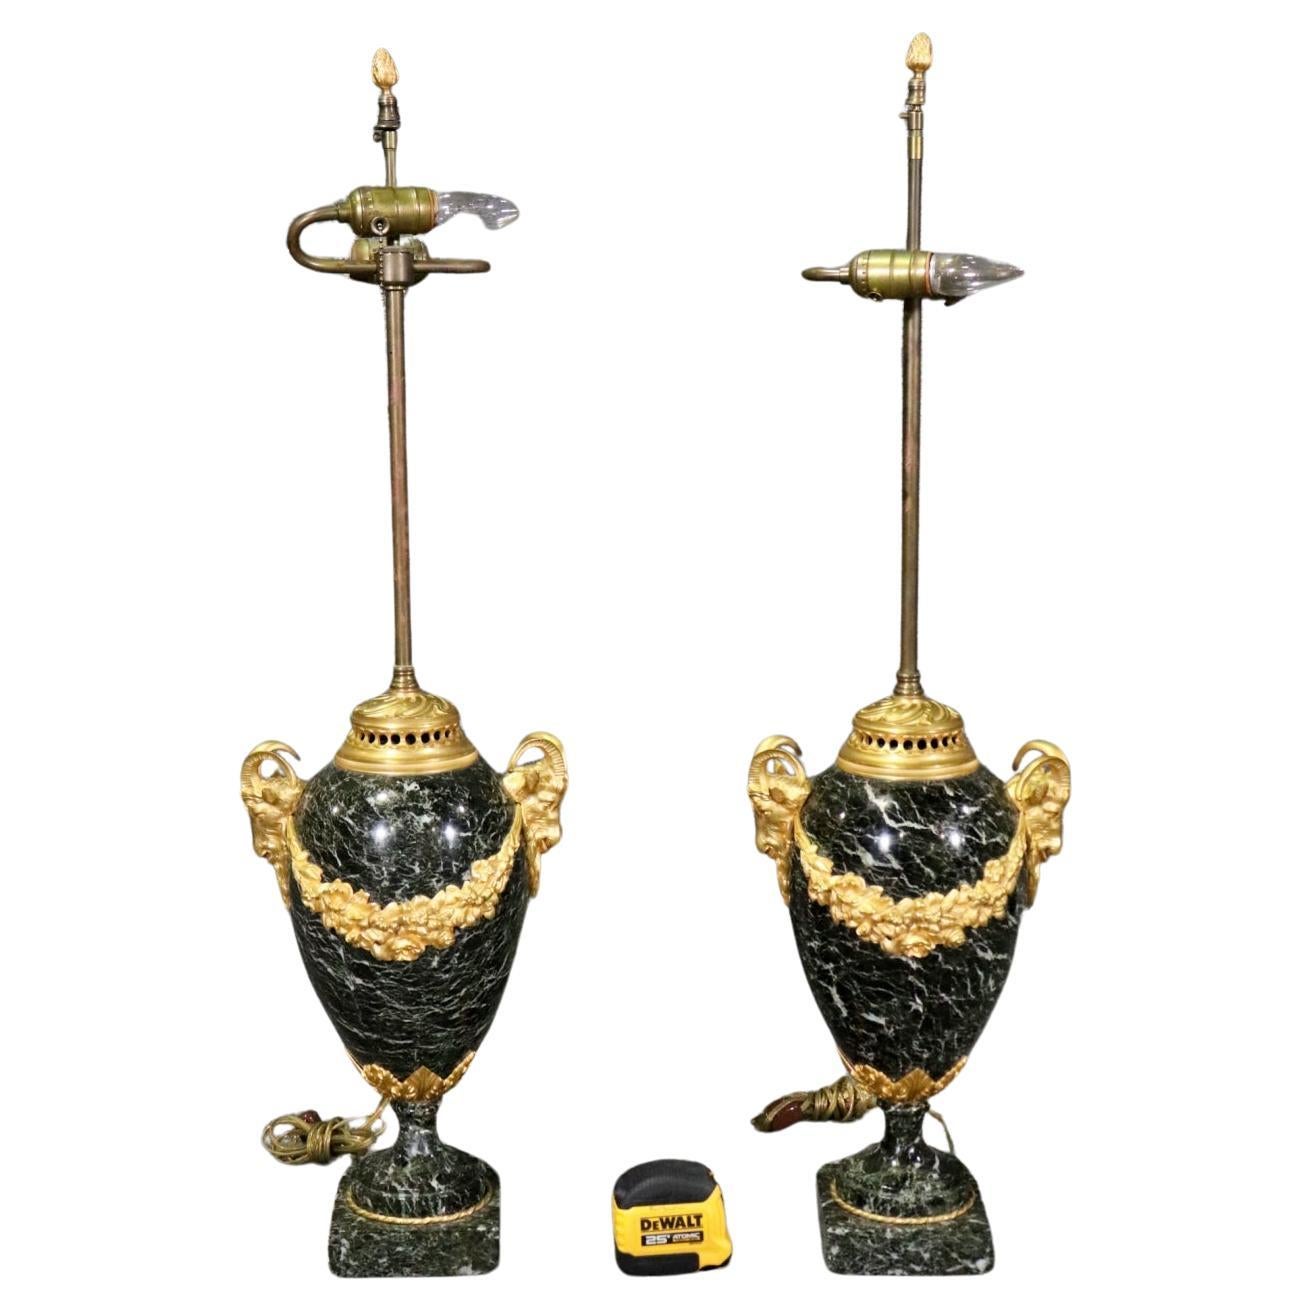 Fantastic Bronze Mounted Dore' and Verdi Marble French Cassolette Table Lamps